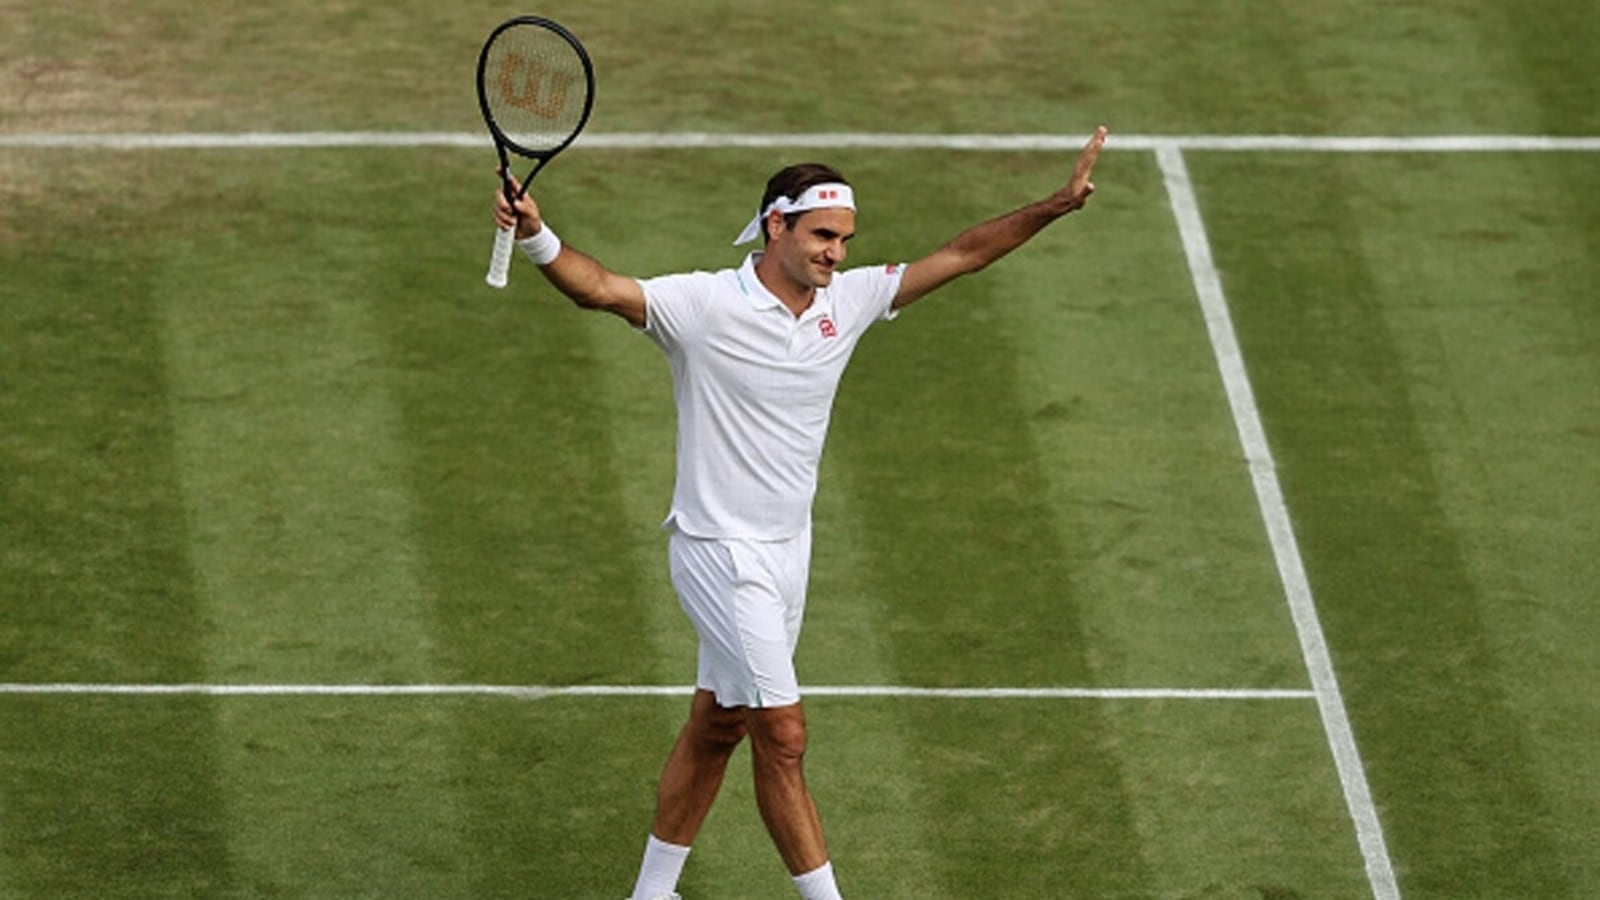 roger-federer-announces-retirement-from-professional-tennis-laver-cup-2022-to-be-swiss-great-s-swansong